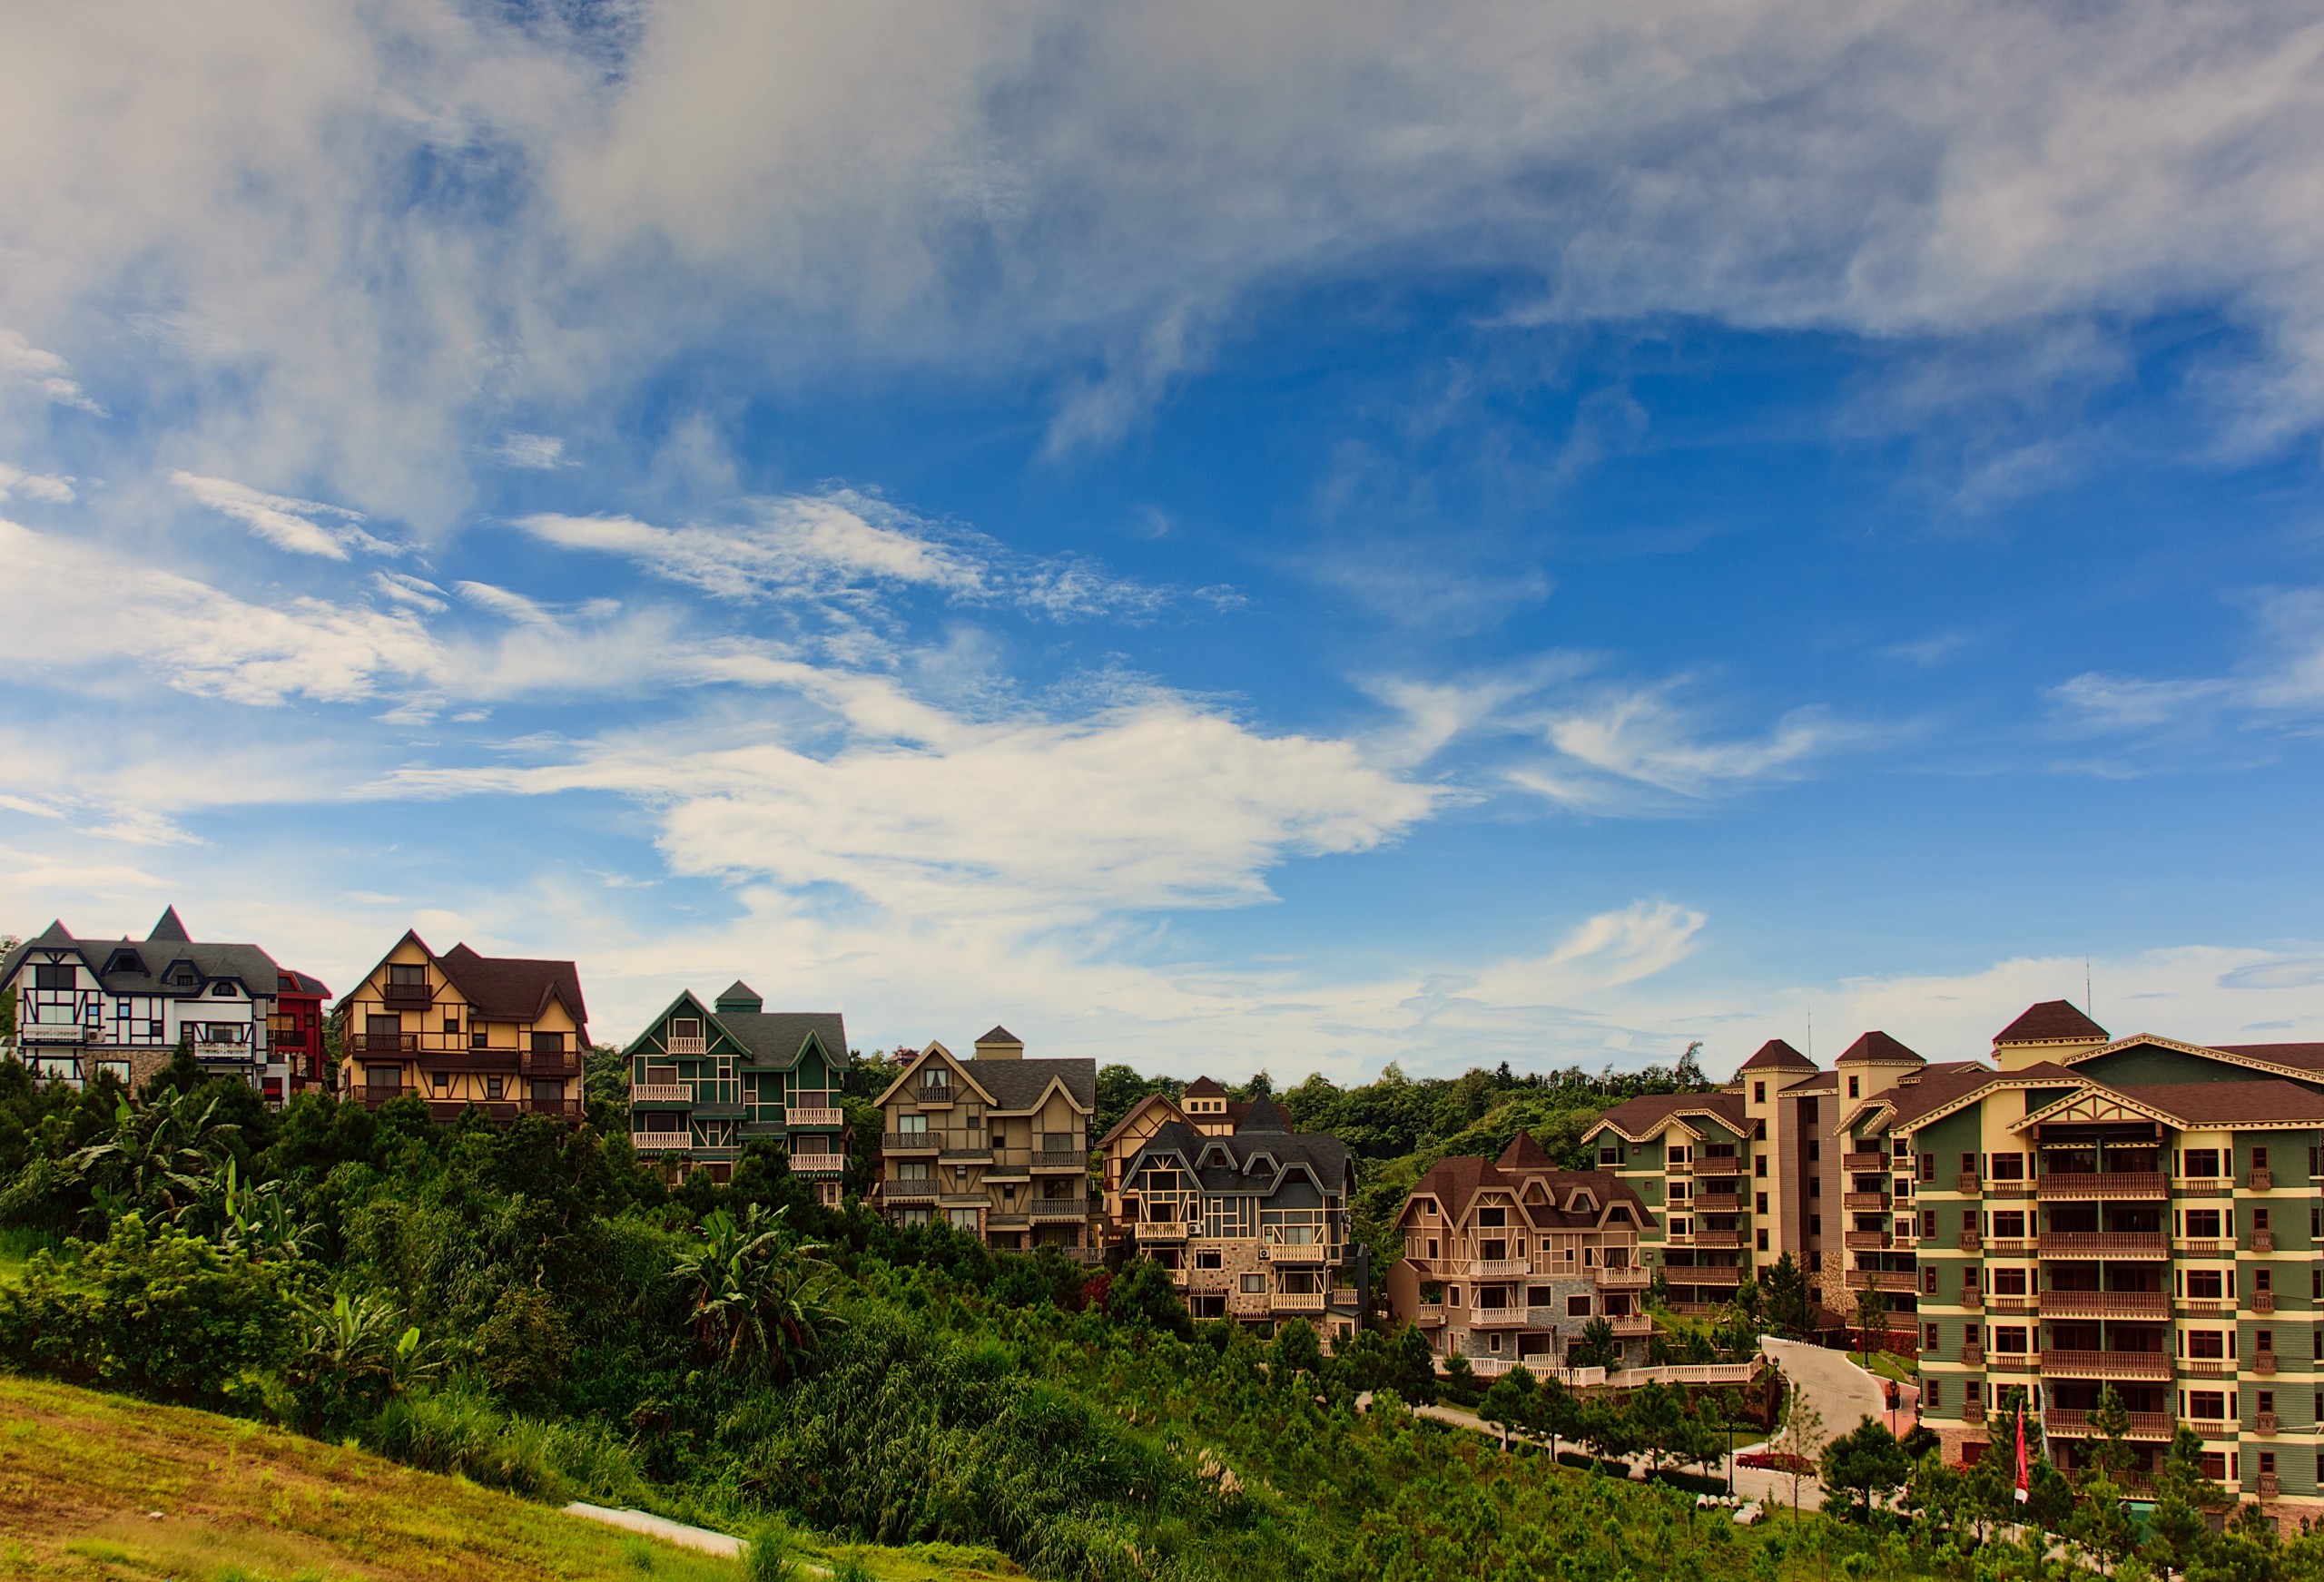 Scenic views within Crosswinds Tagaytay